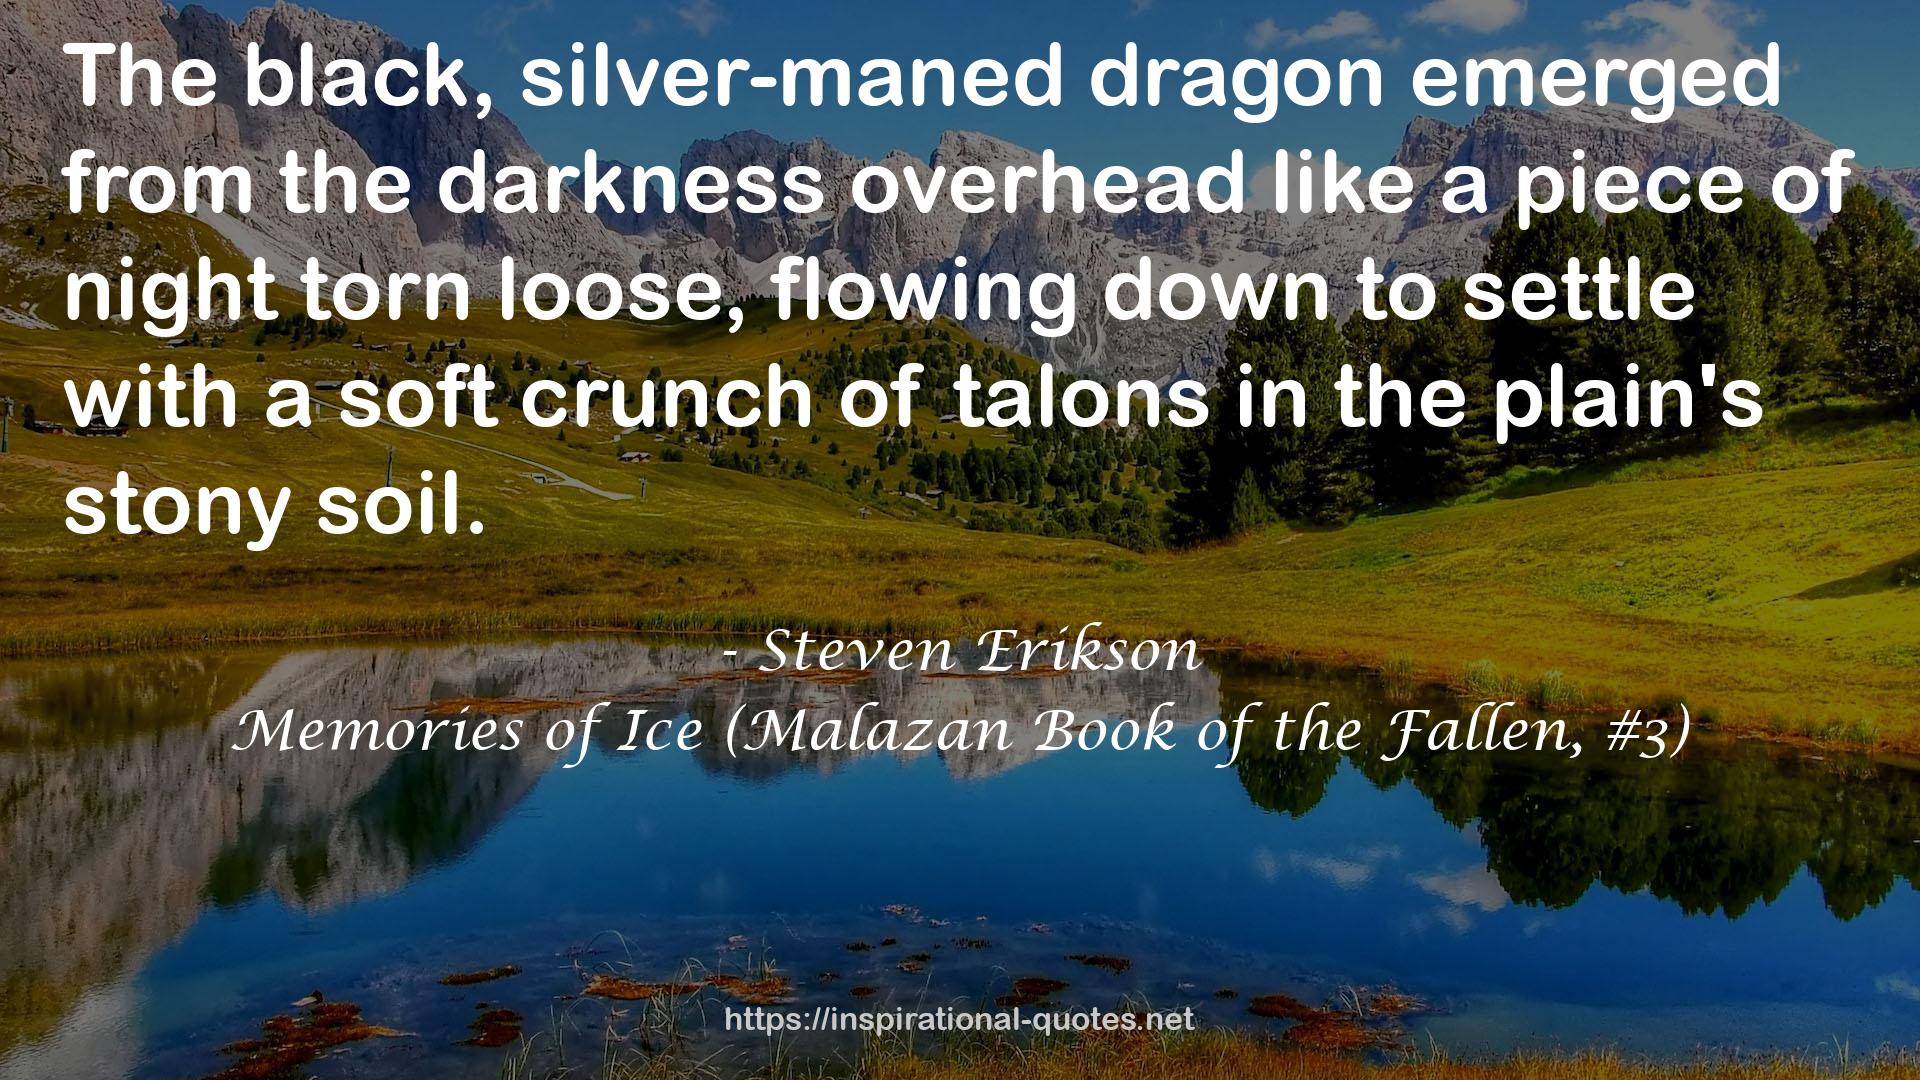 Memories of Ice (Malazan Book of the Fallen, #3) QUOTES